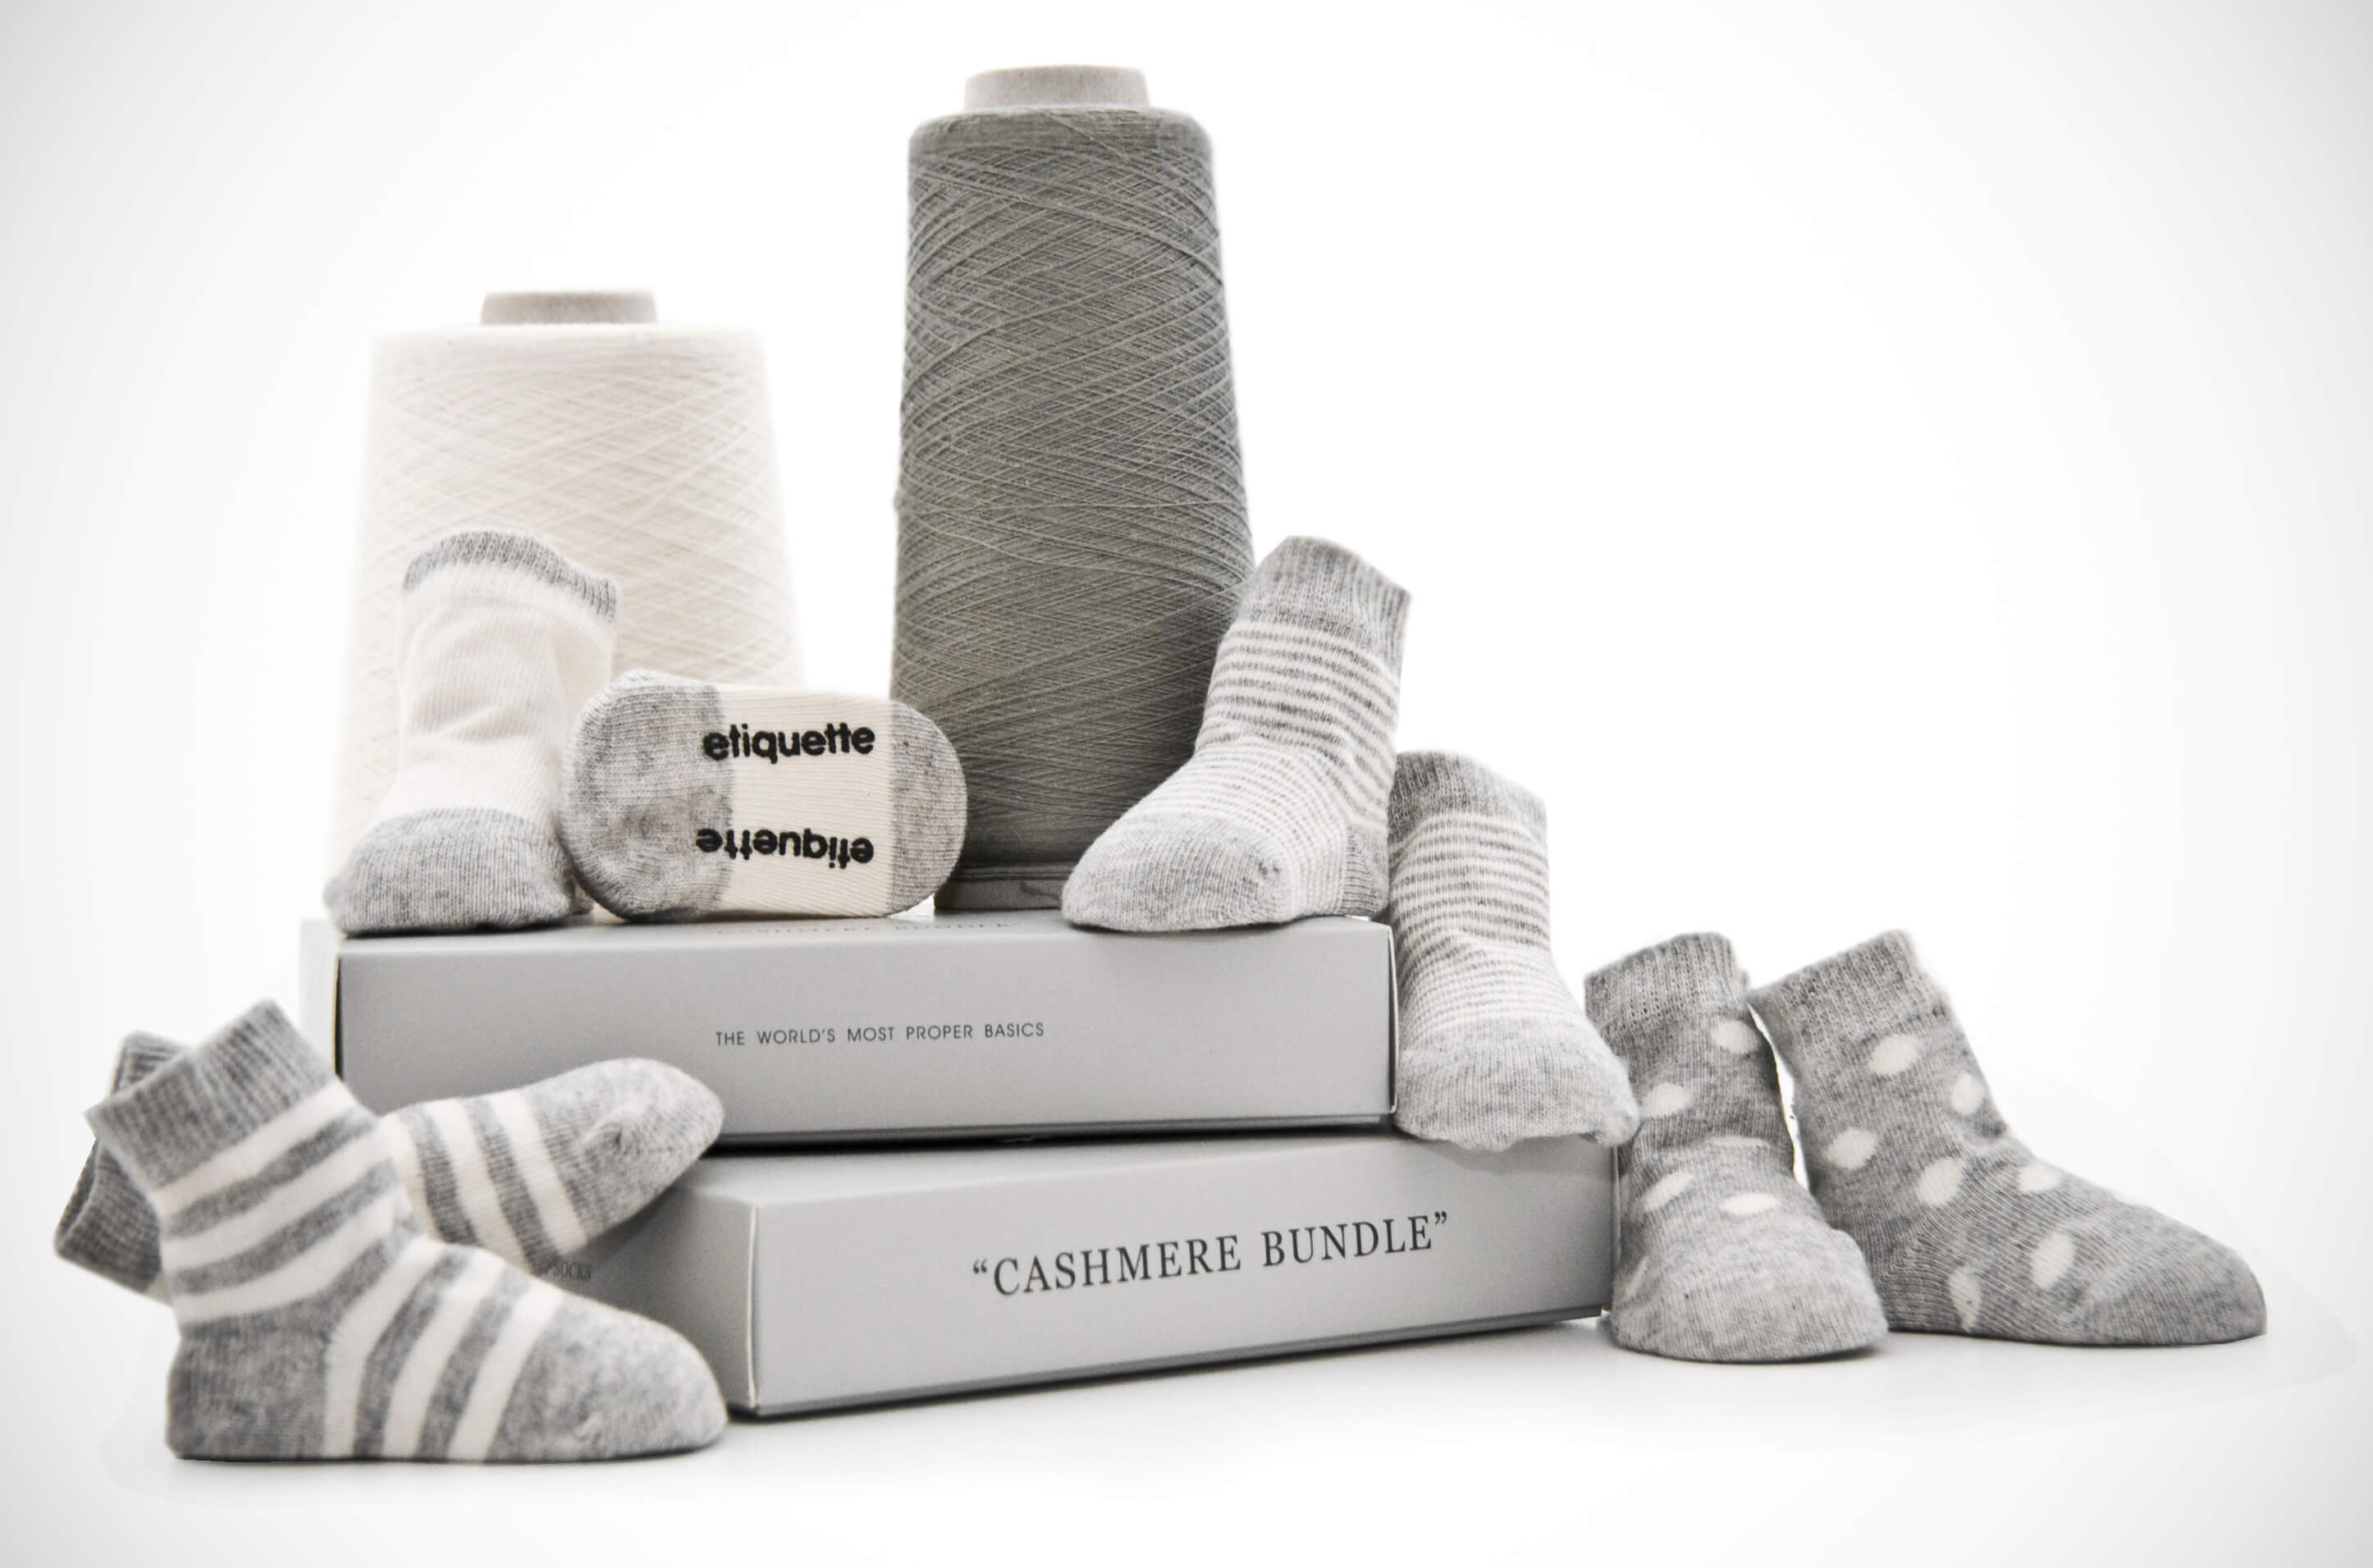 Luxury cashmere baby socks gifts & baby socks gift boxes by Etiquette Clothiers